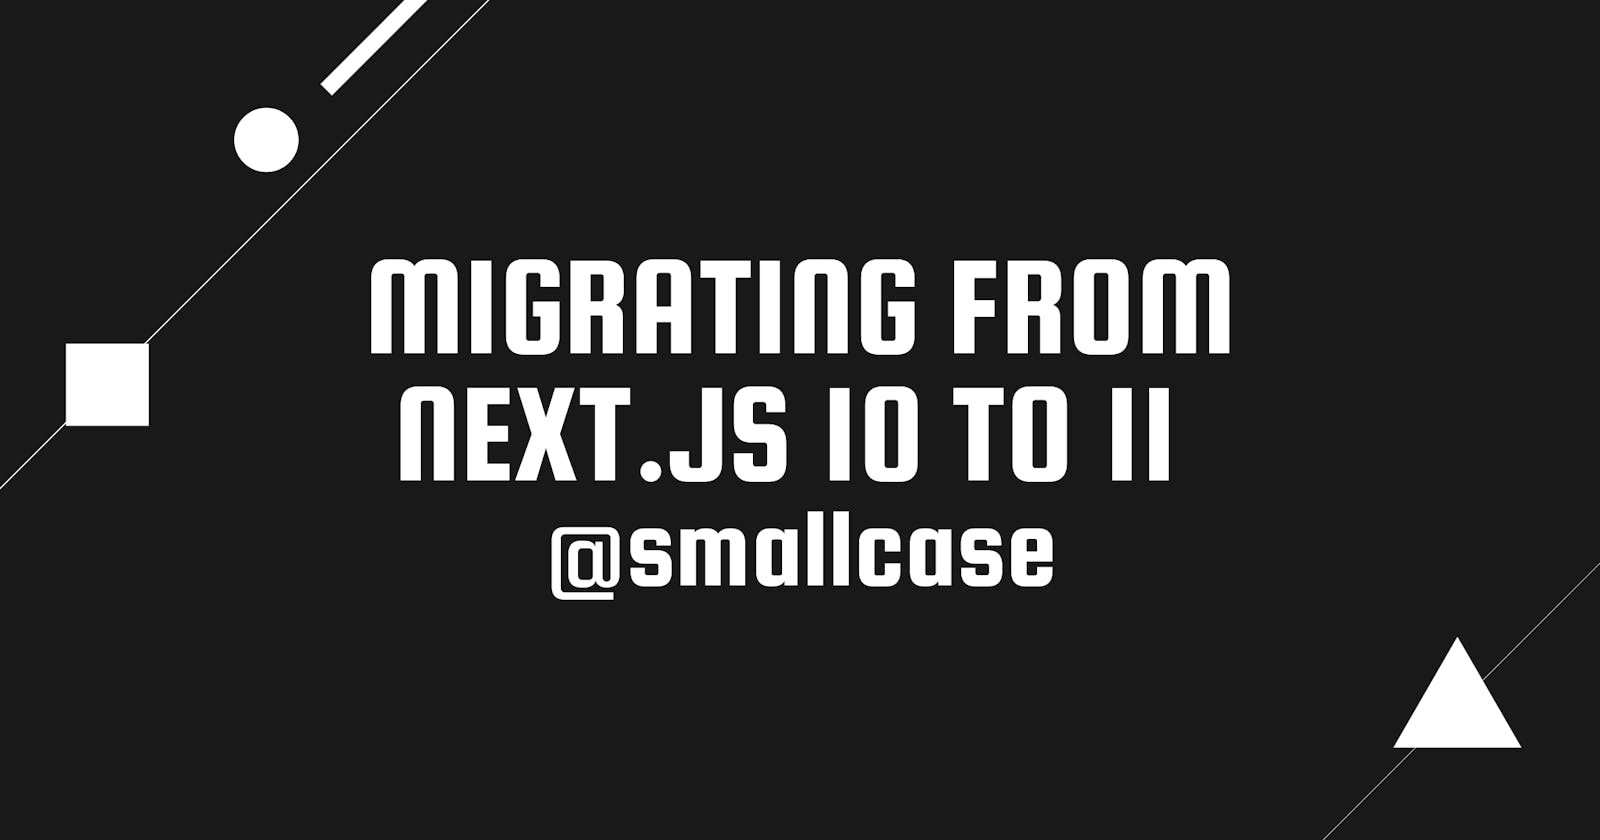 Migrating from nextjs 10 to 11 @smallcase